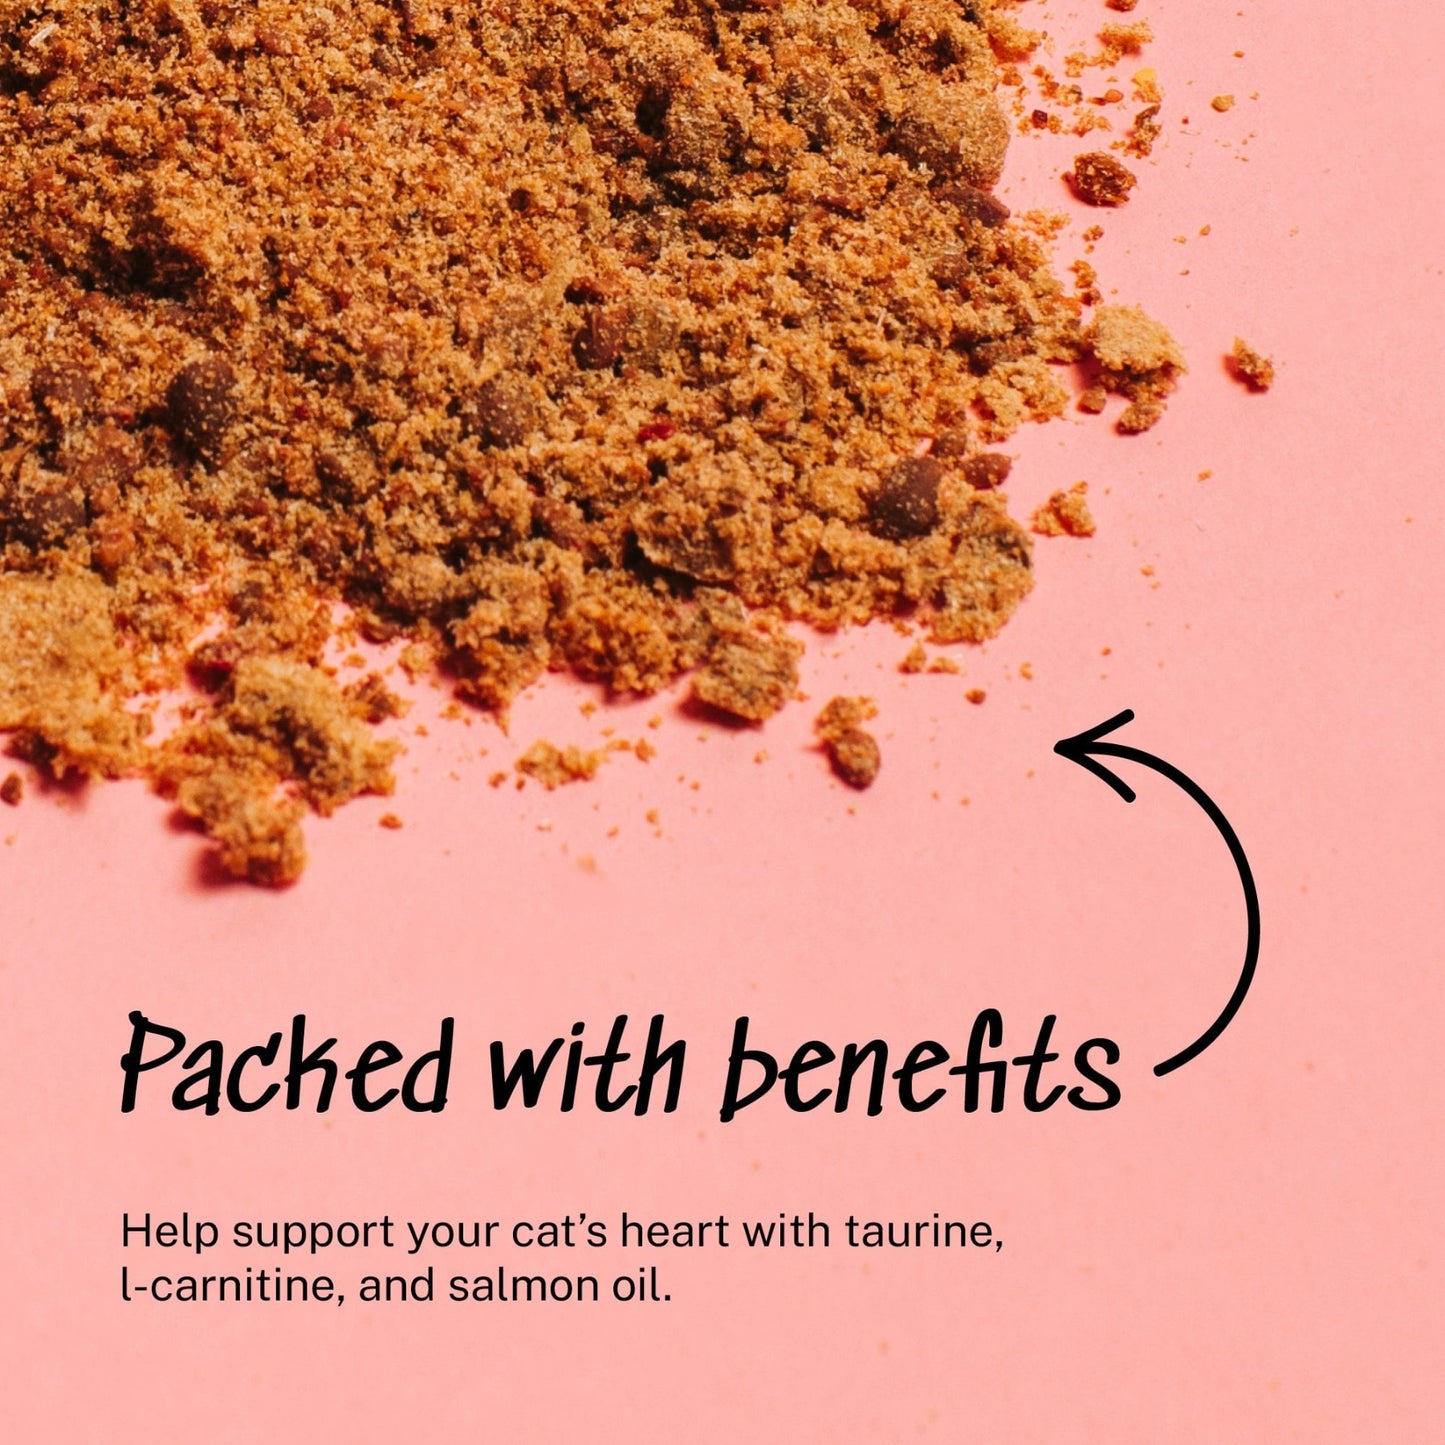 Packed with benefits - Help support your cat’s heart with taurine,  l-carnitine, and salmon oil.